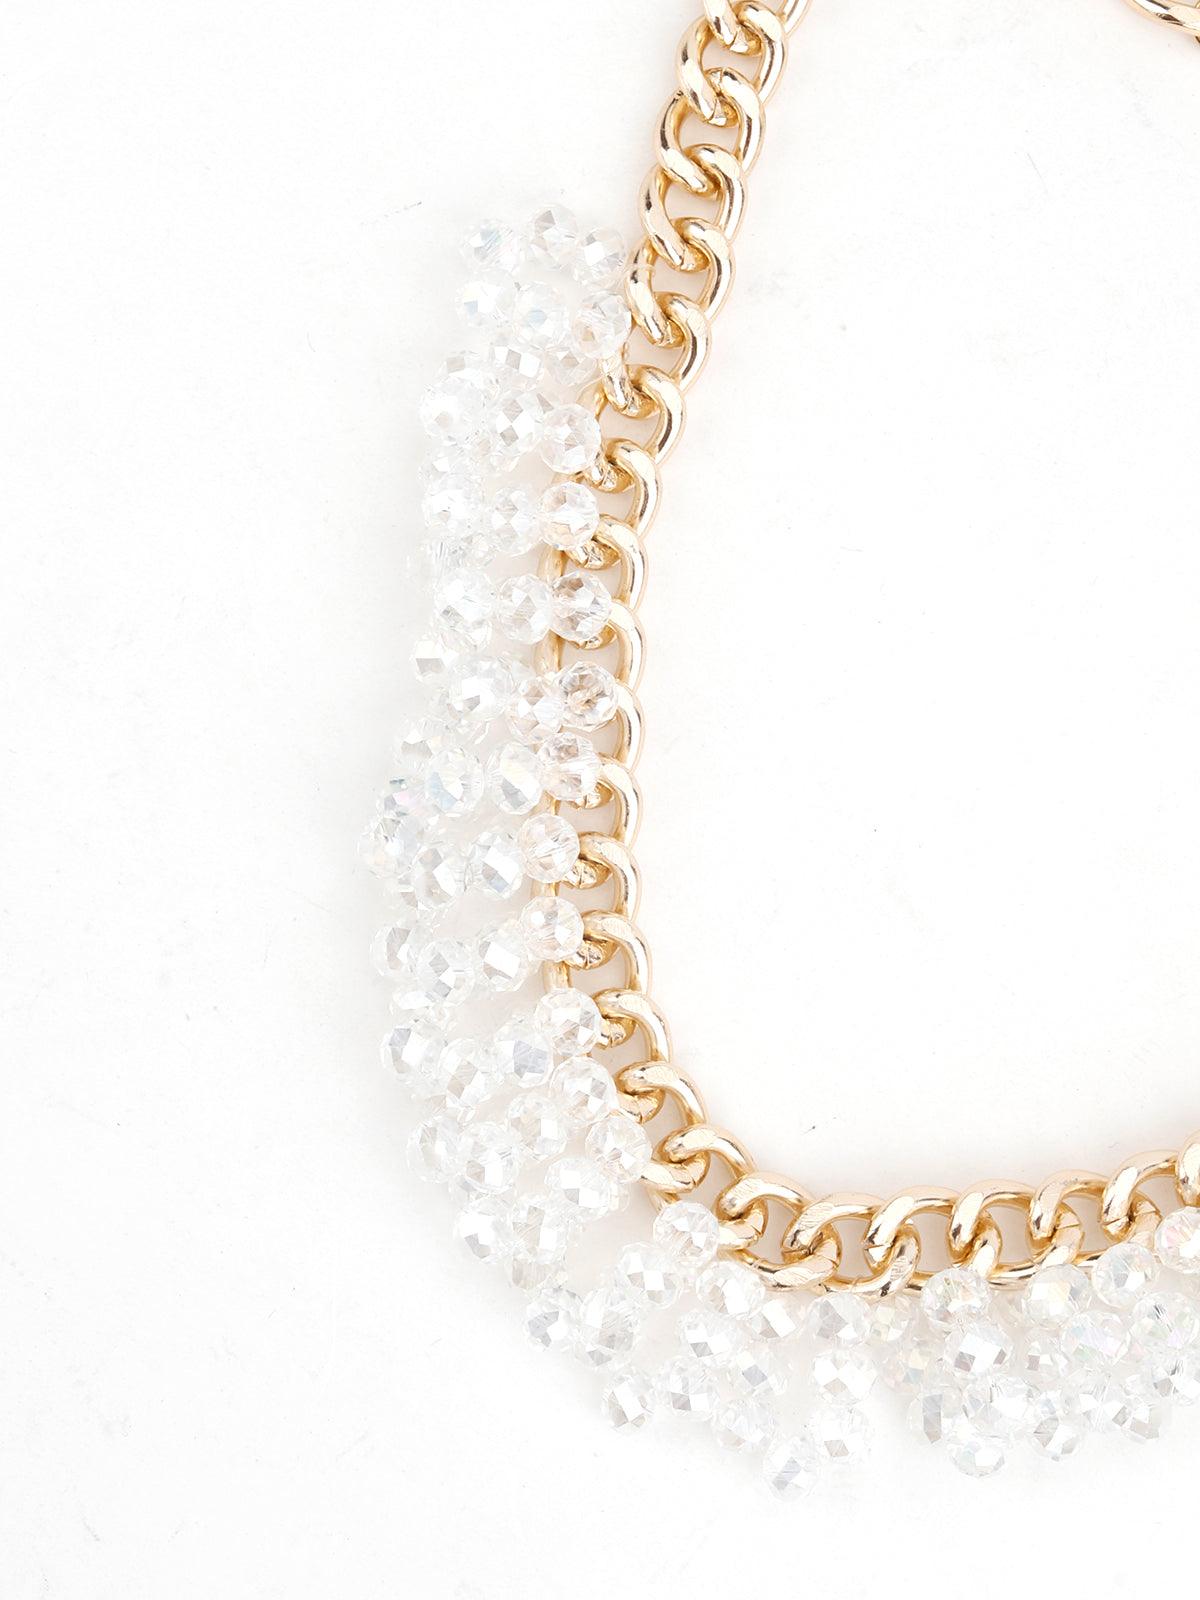 White Angelic Necklace - Odette